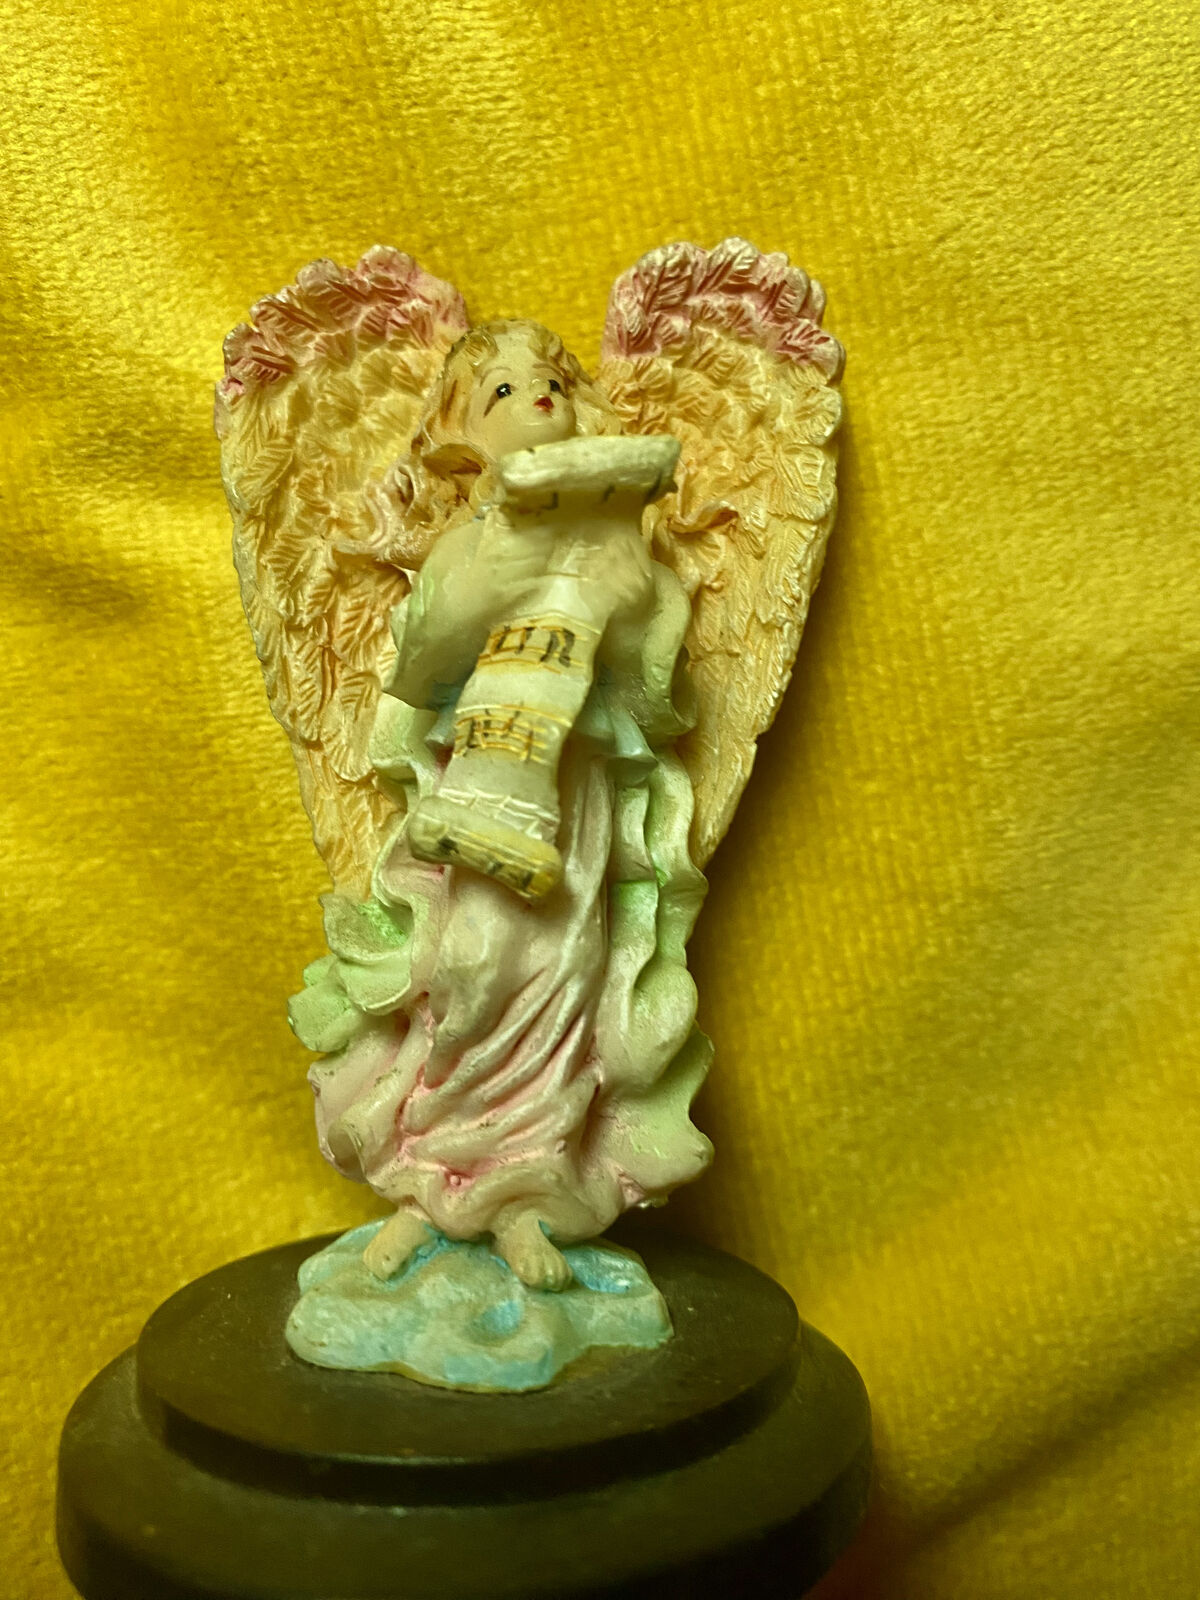 VINTAGE 1990S RESTN ANGEL FIGURINE 3.5 INCHES TALL